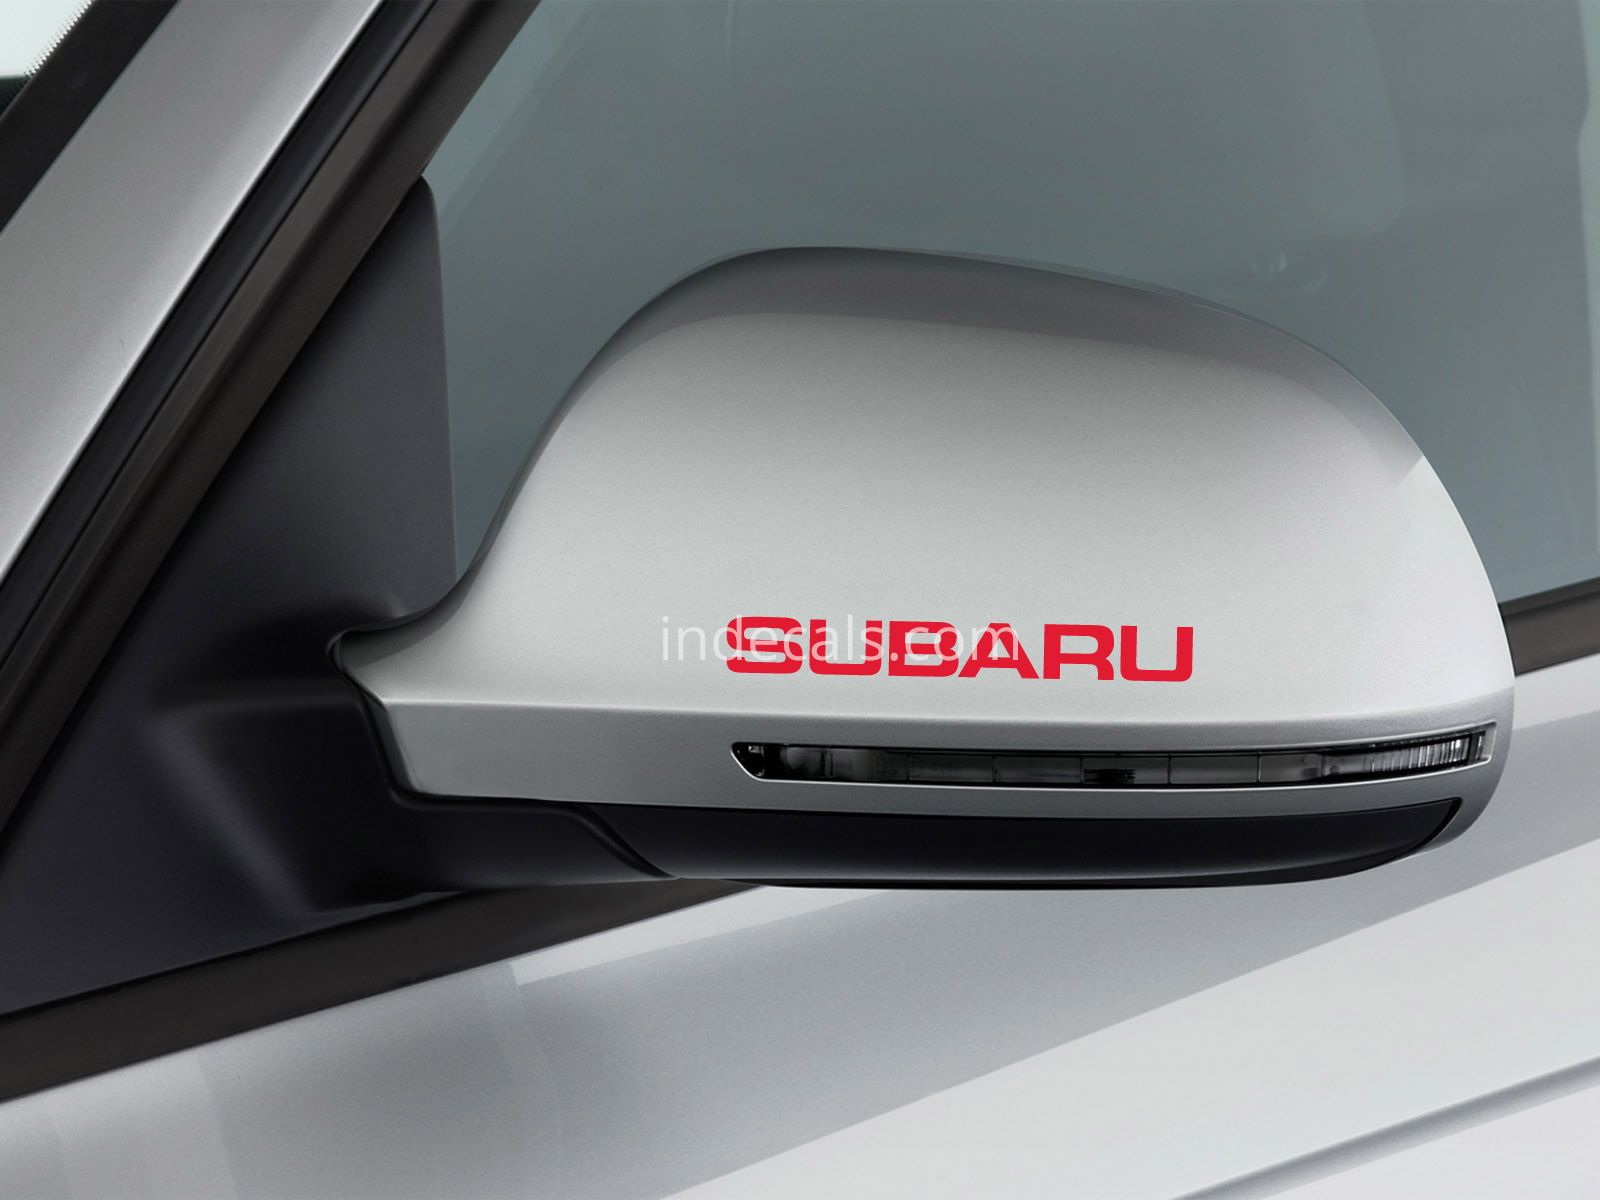 3 x Subaru Stickers for Mirrors - Red